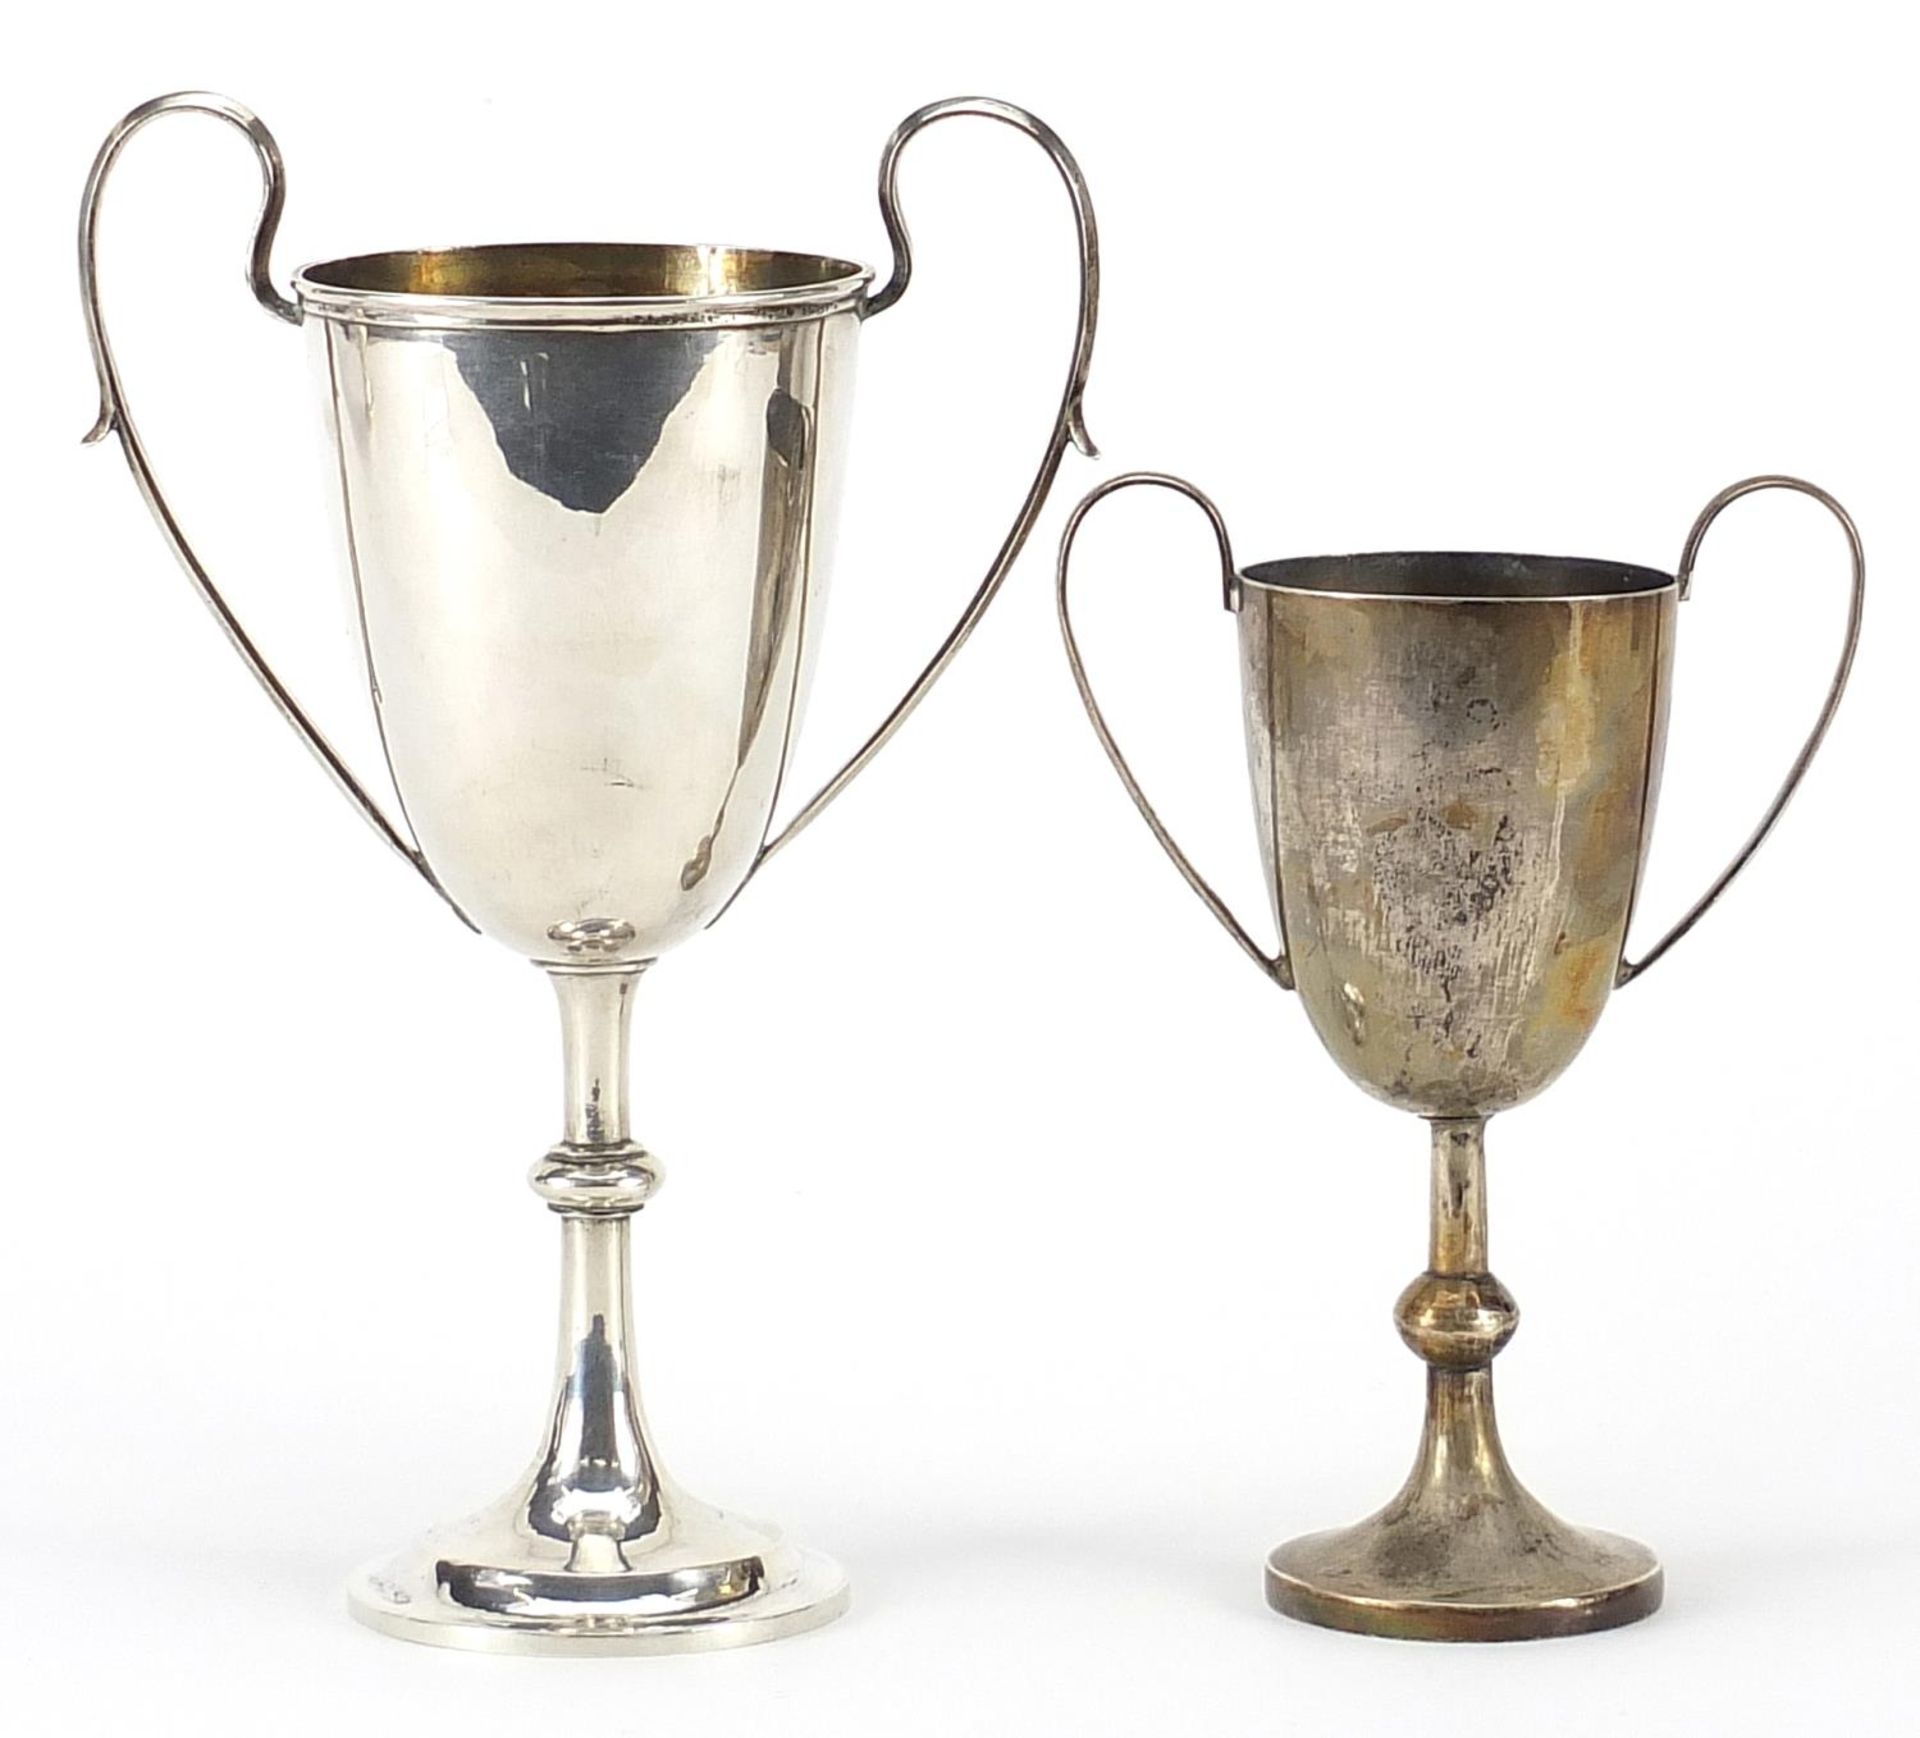 Two Chinese silver tennis trophies engraved RNA Depot Hong Kong Winner Tennis Tournament 1928 F - Image 2 of 4